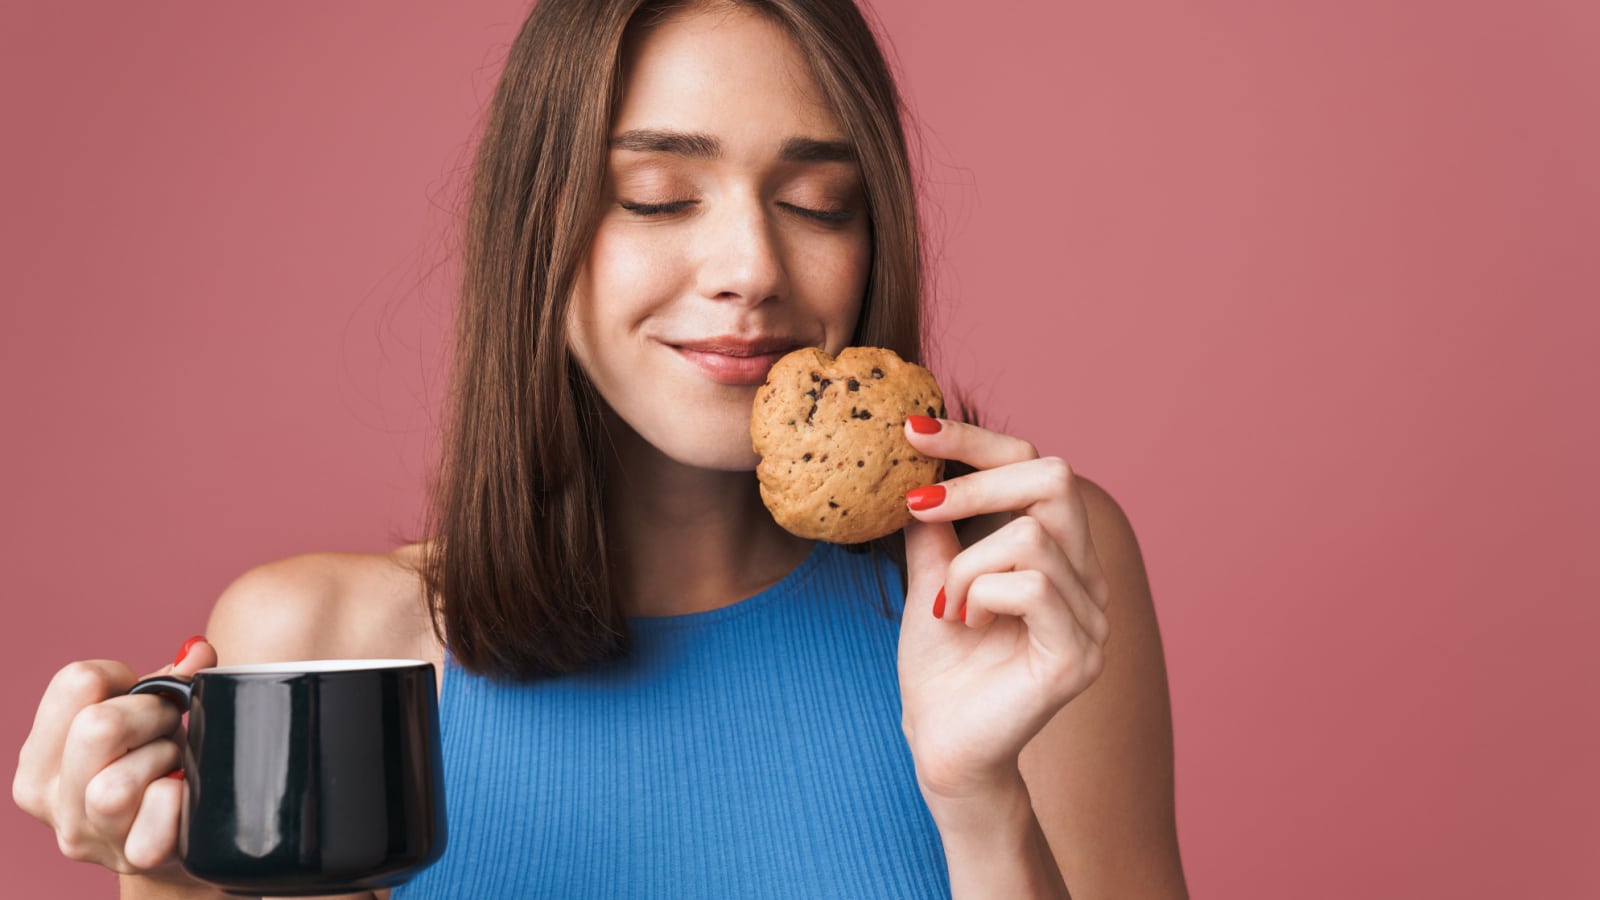 Portrait of a young smiling attractive brunette woman standing isolated over pink background, holding a cup of coffee and eating a chocolate chip cookie